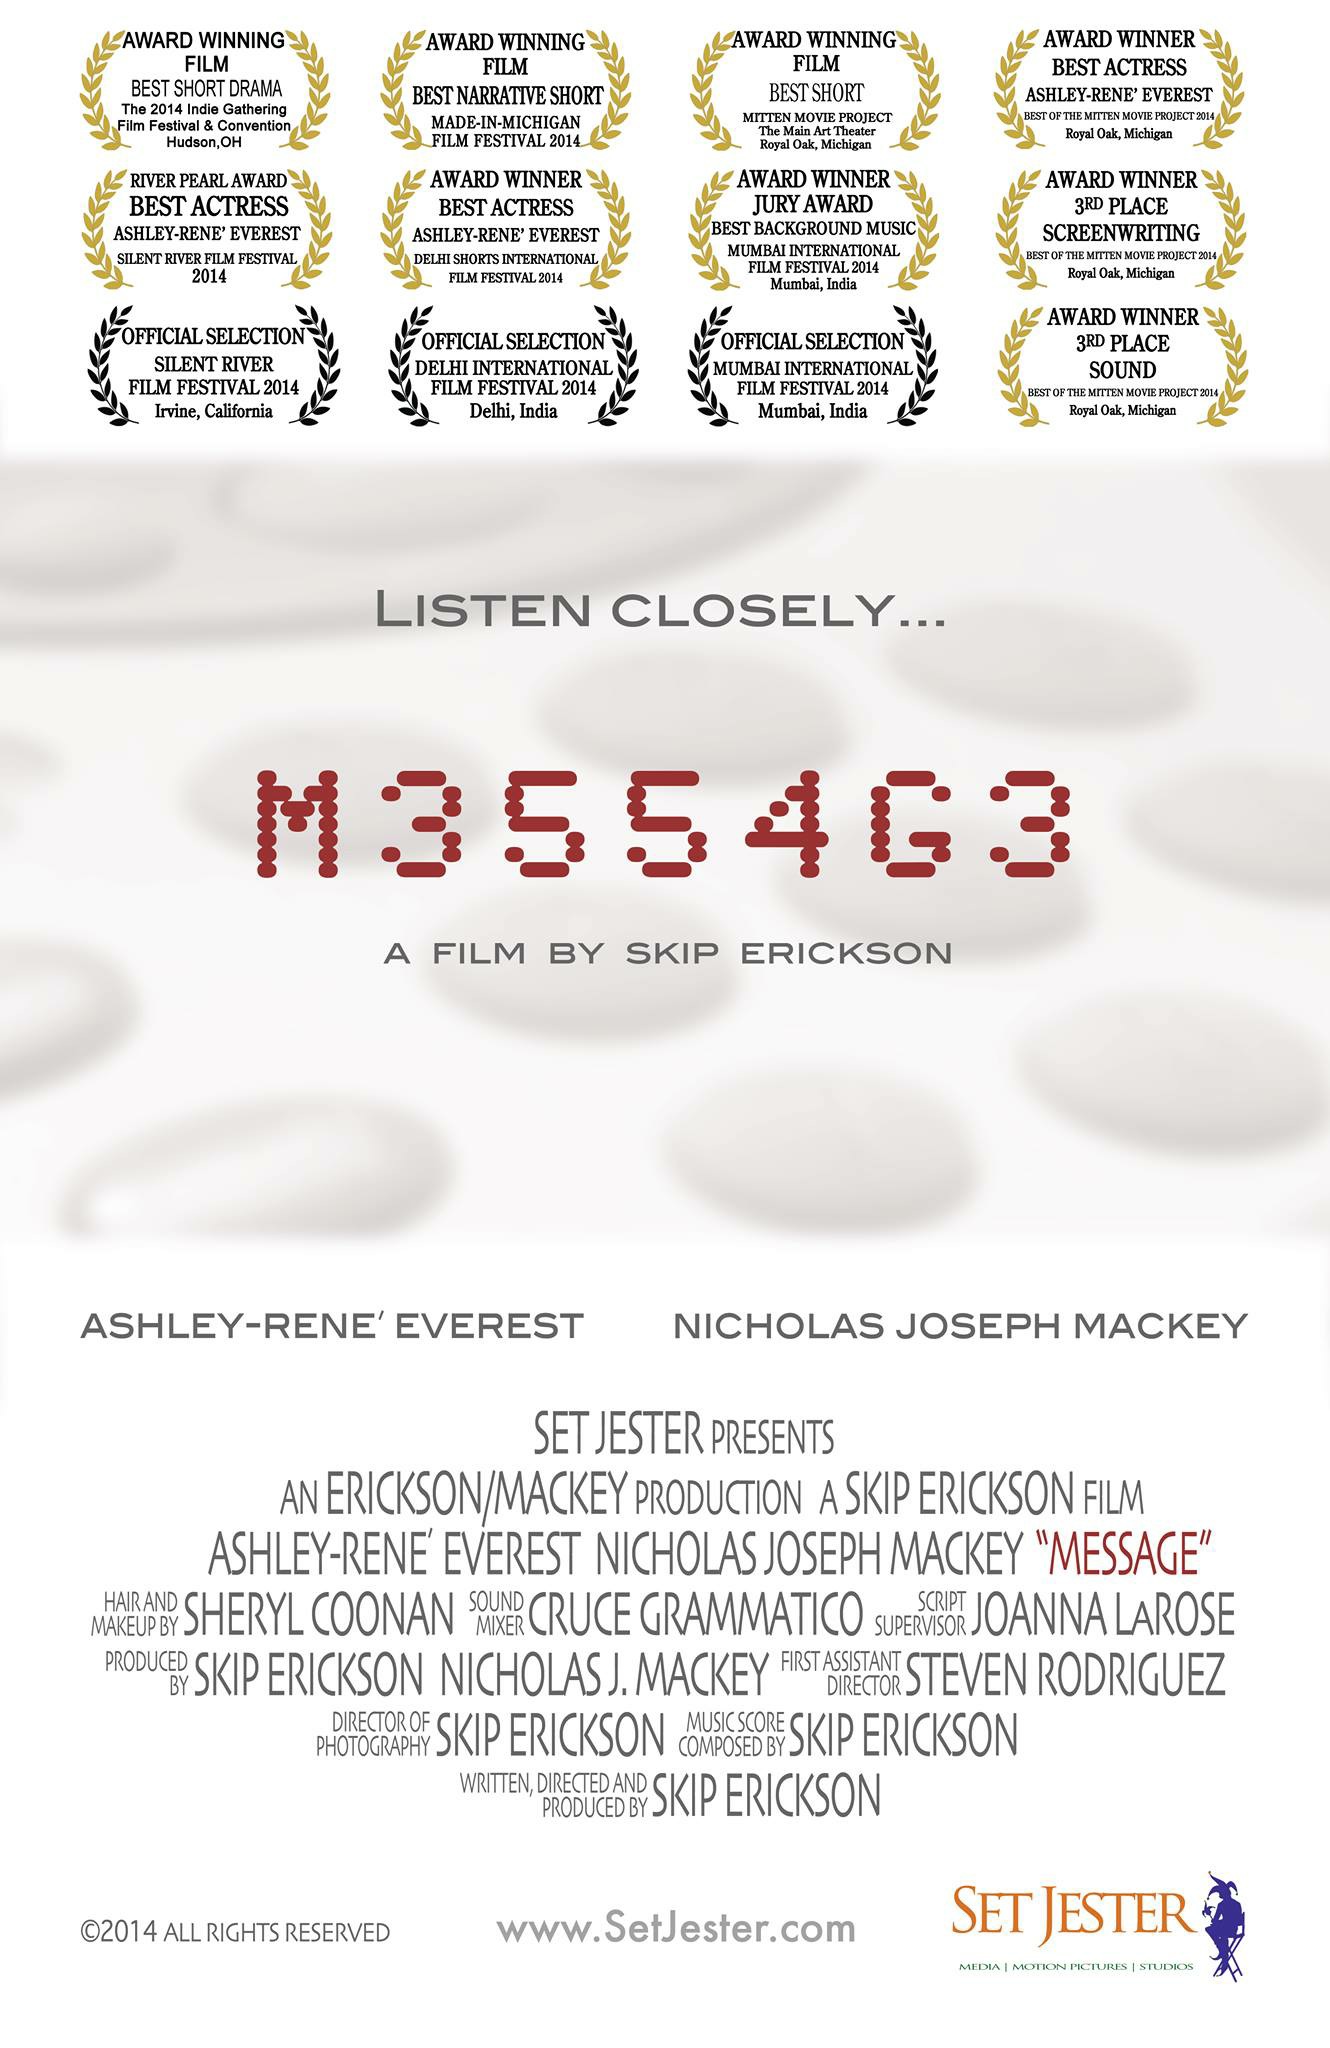 Official Poster with Award Winning Laurels.